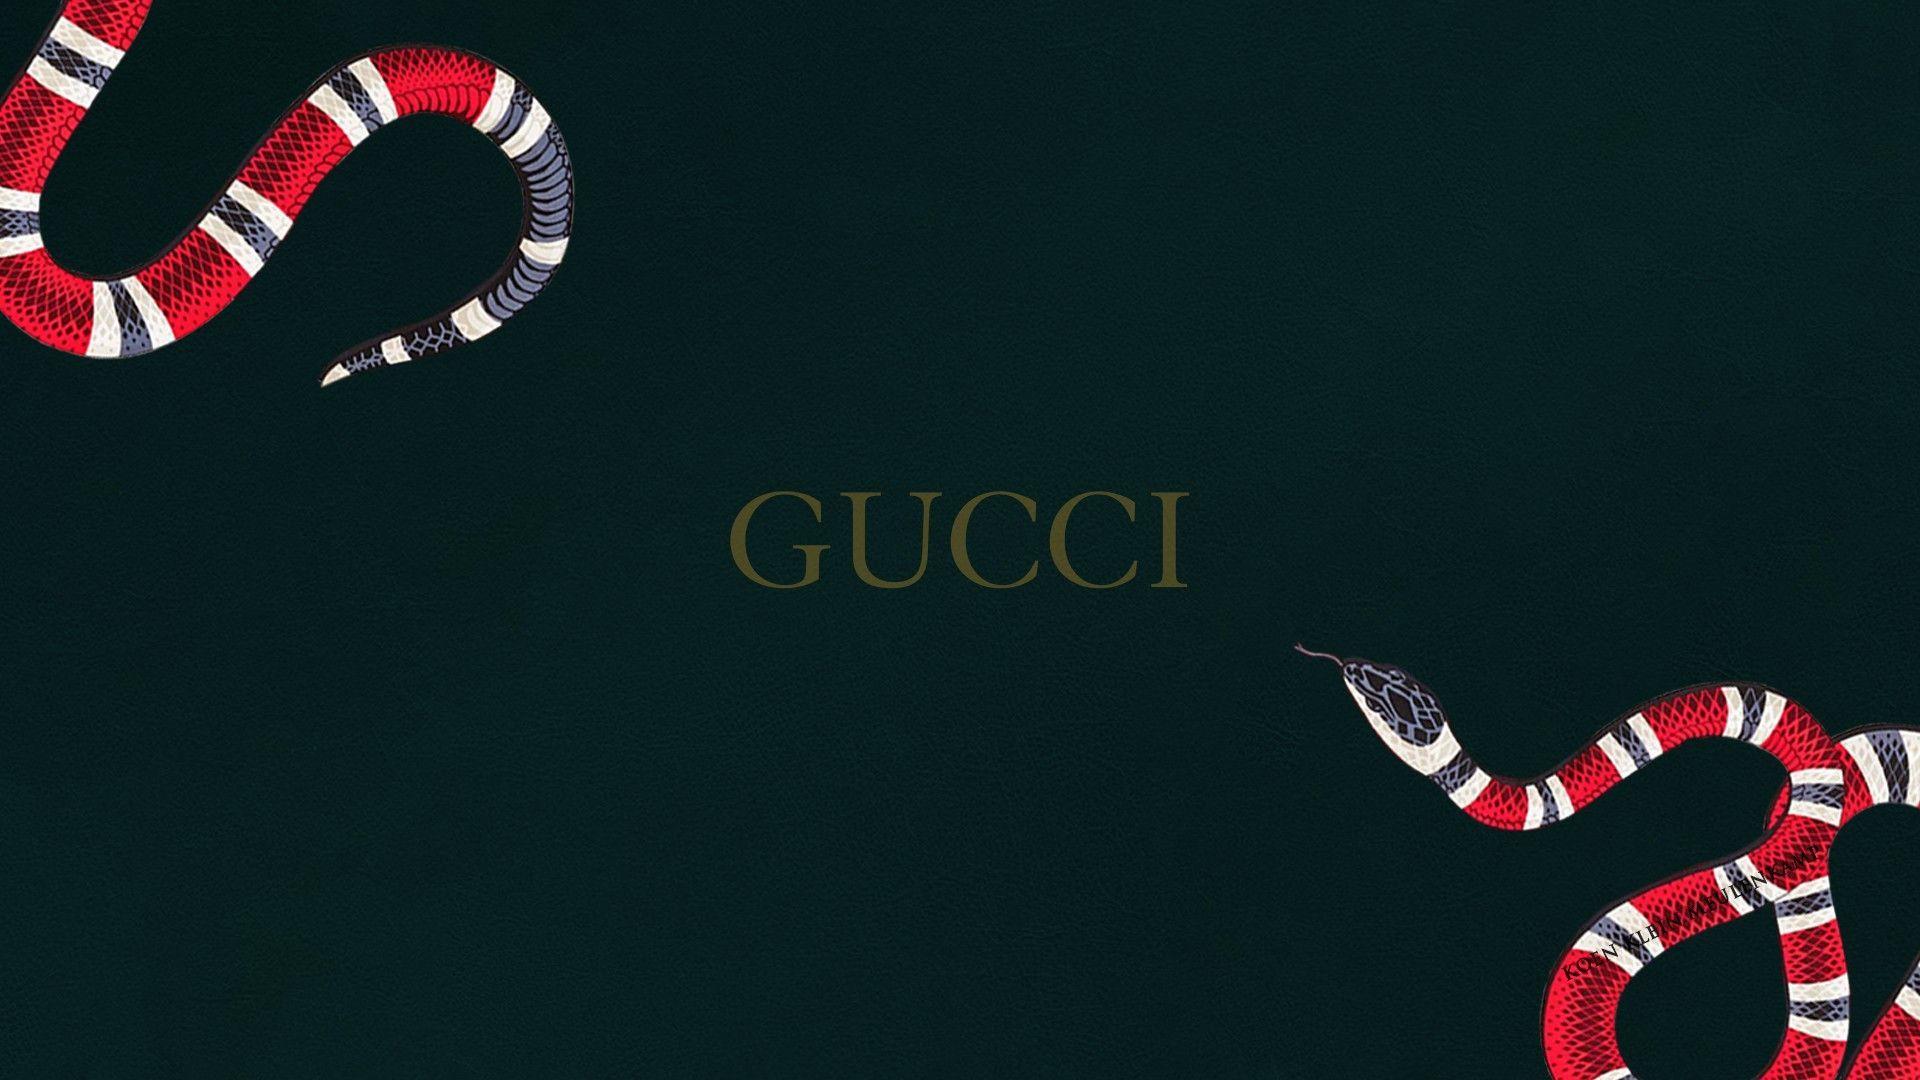 Gucci 4k Wallpapers - Top Free Gucci 4k